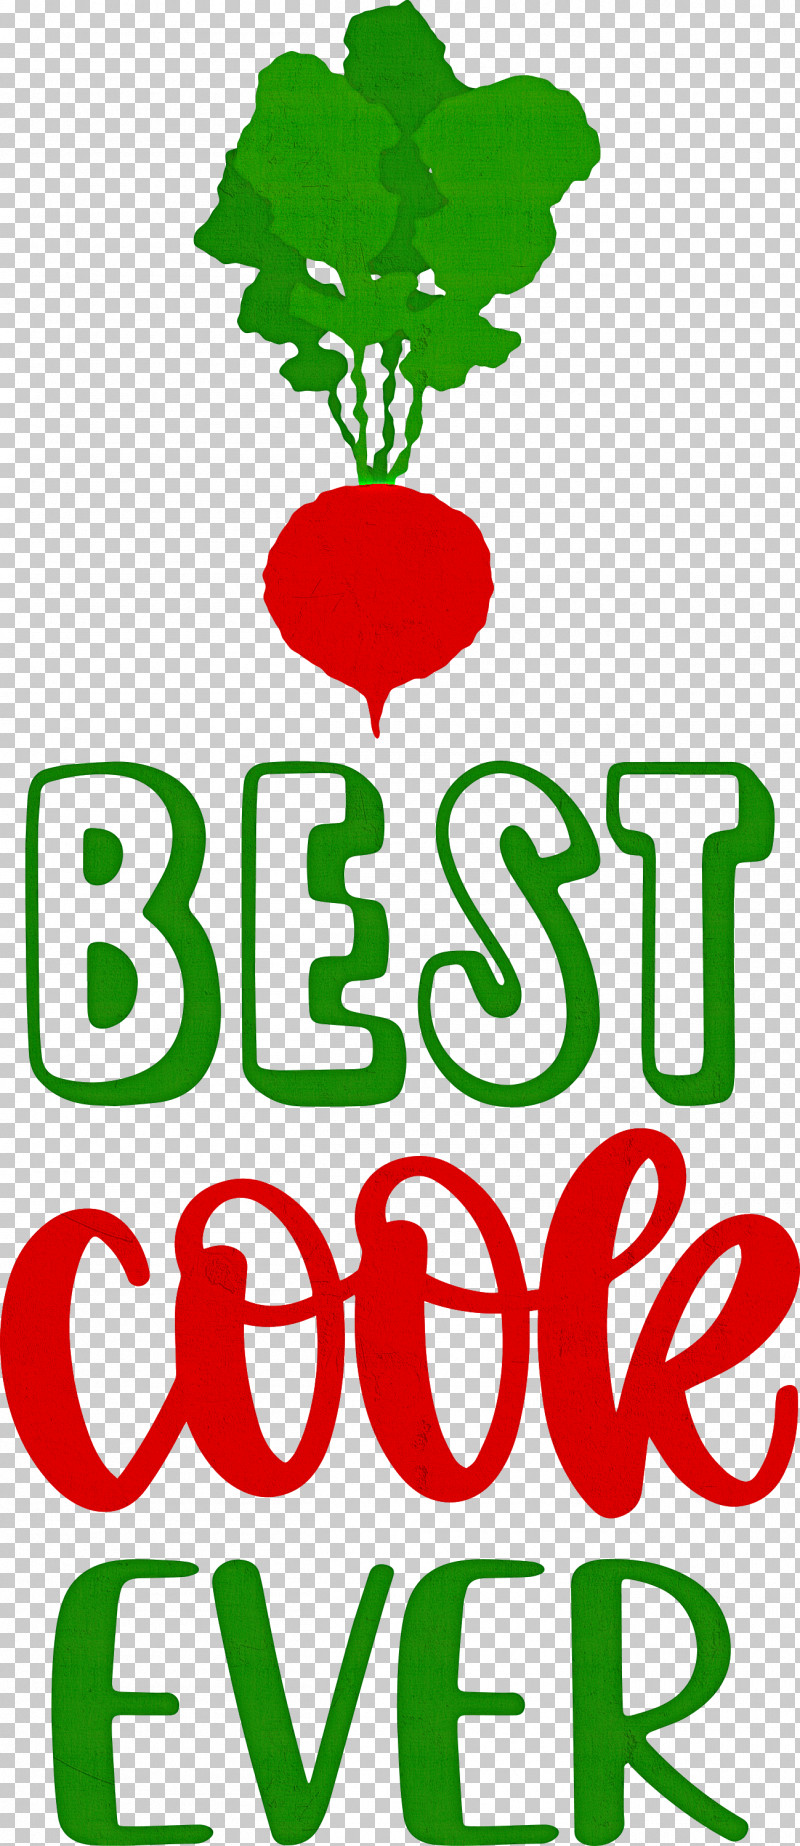 Best Cook Ever Food Kitchen PNG, Clipart, Chef, Cook, Cooking, Data, Food Free PNG Download